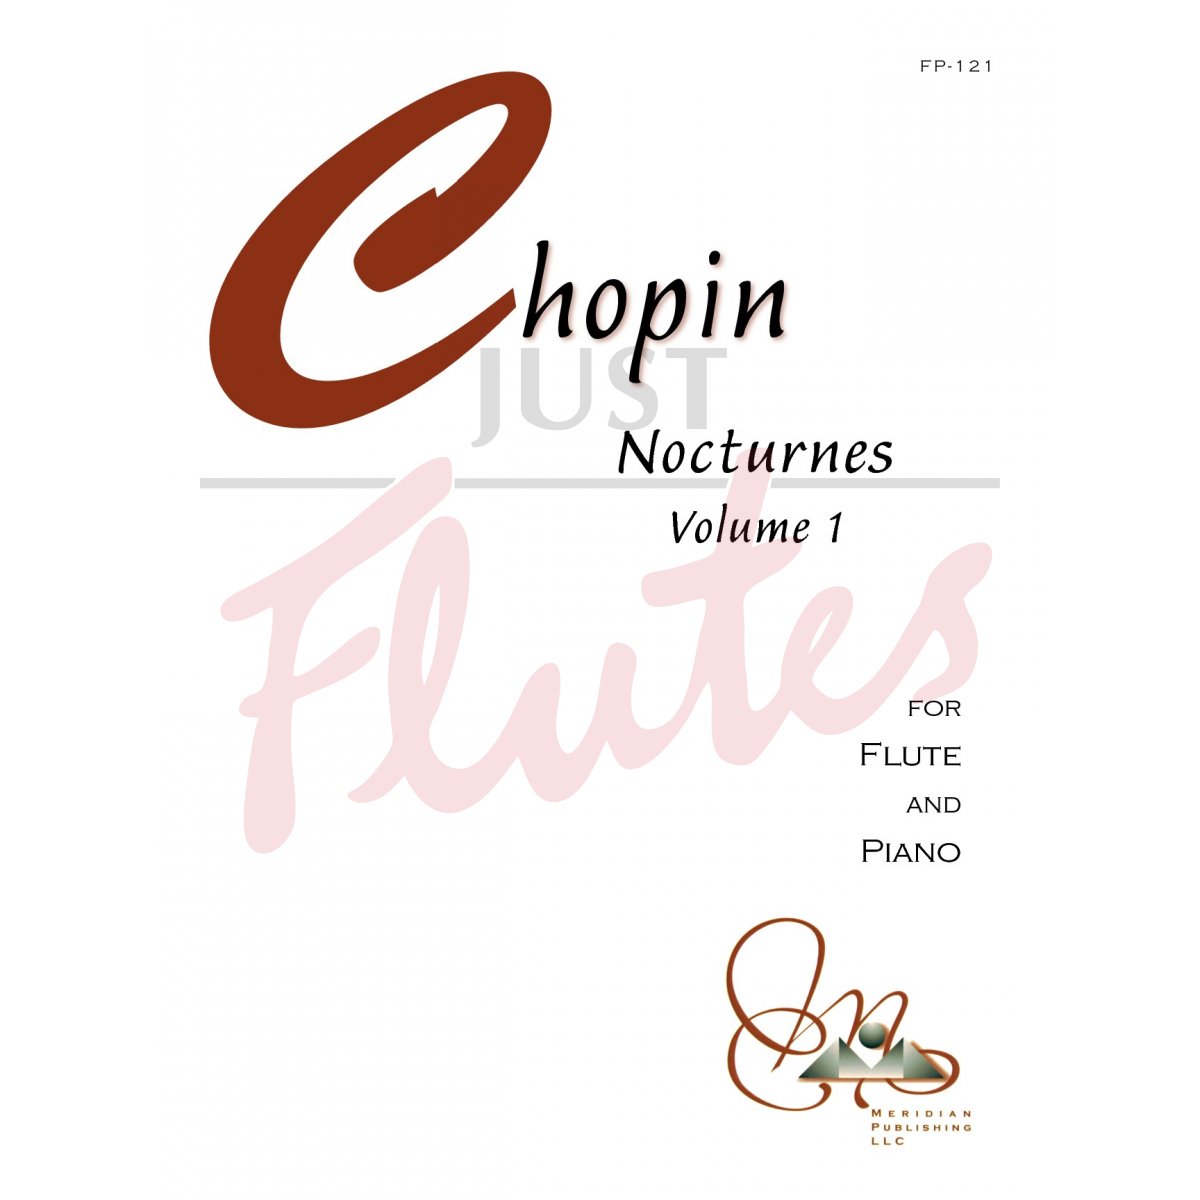 Nocturnes for Flute and Piano